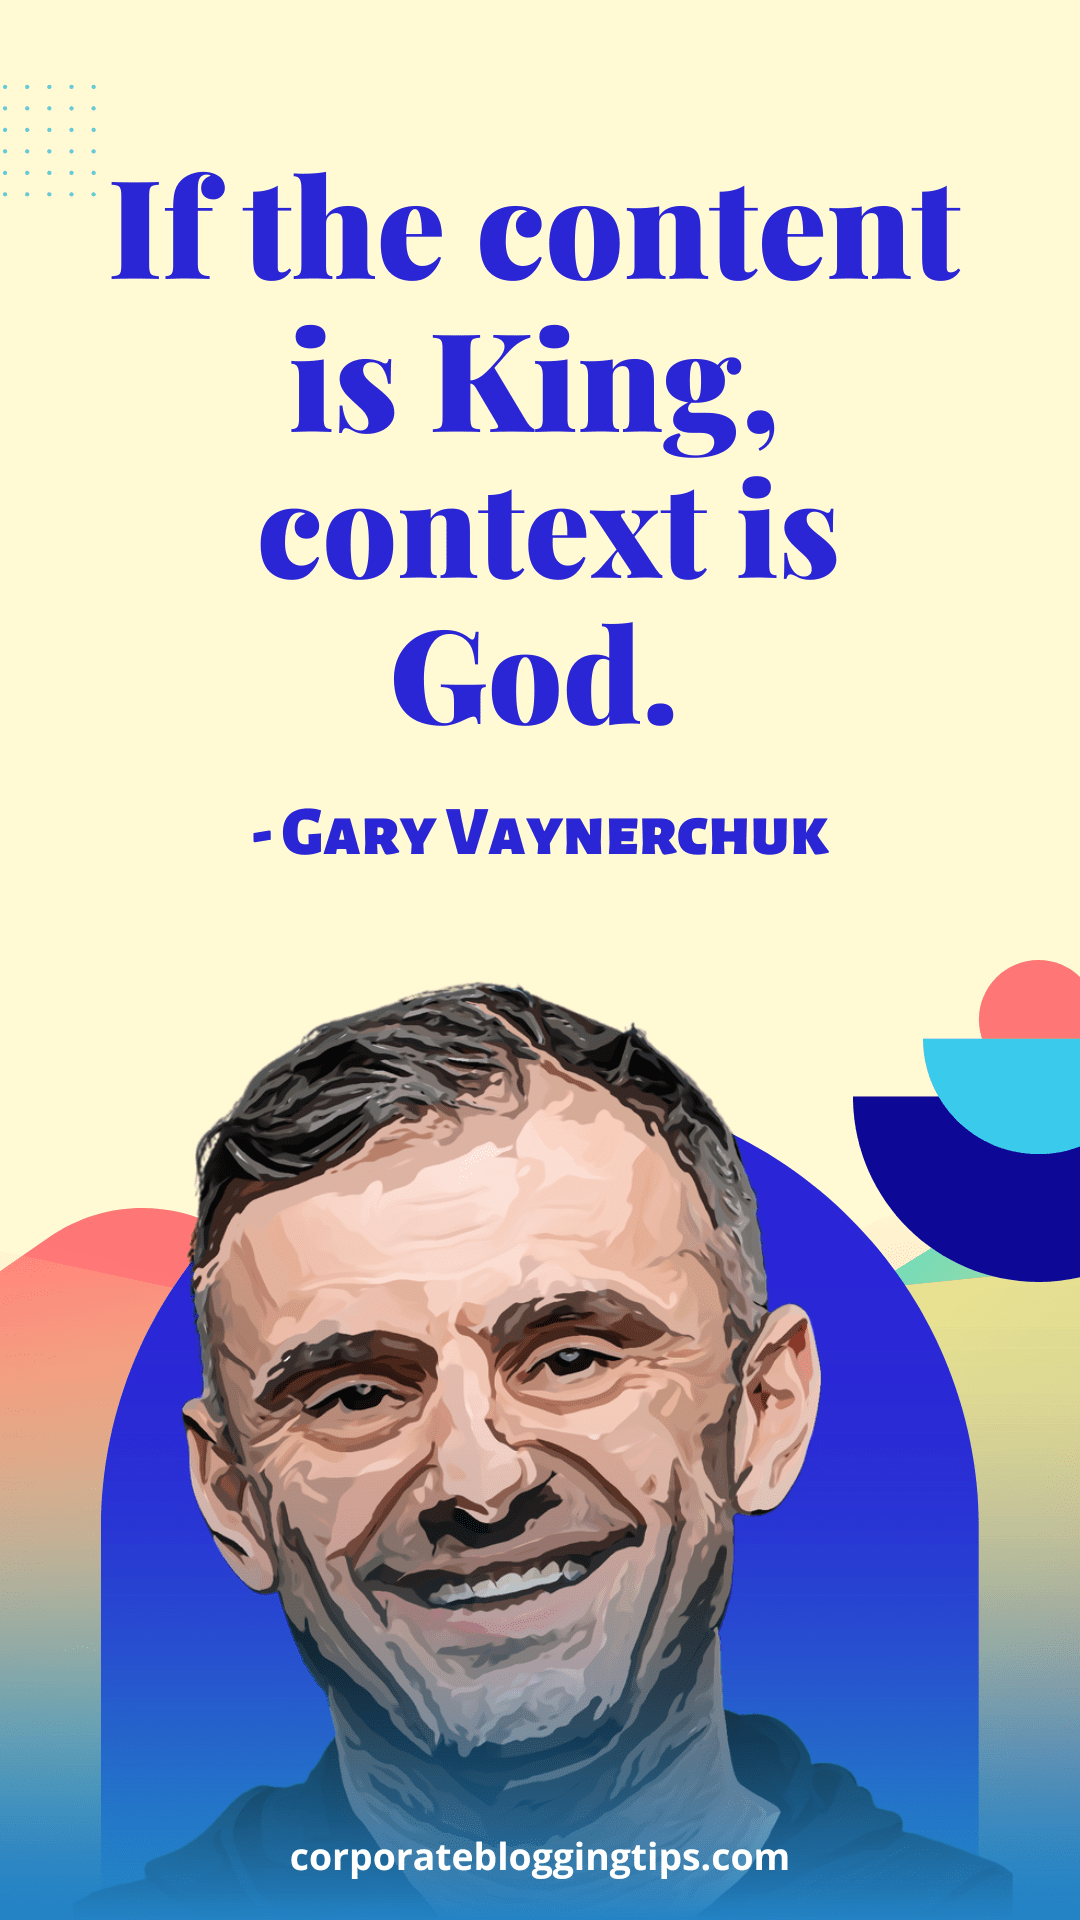 Gary Vaynerchuk quotes about content